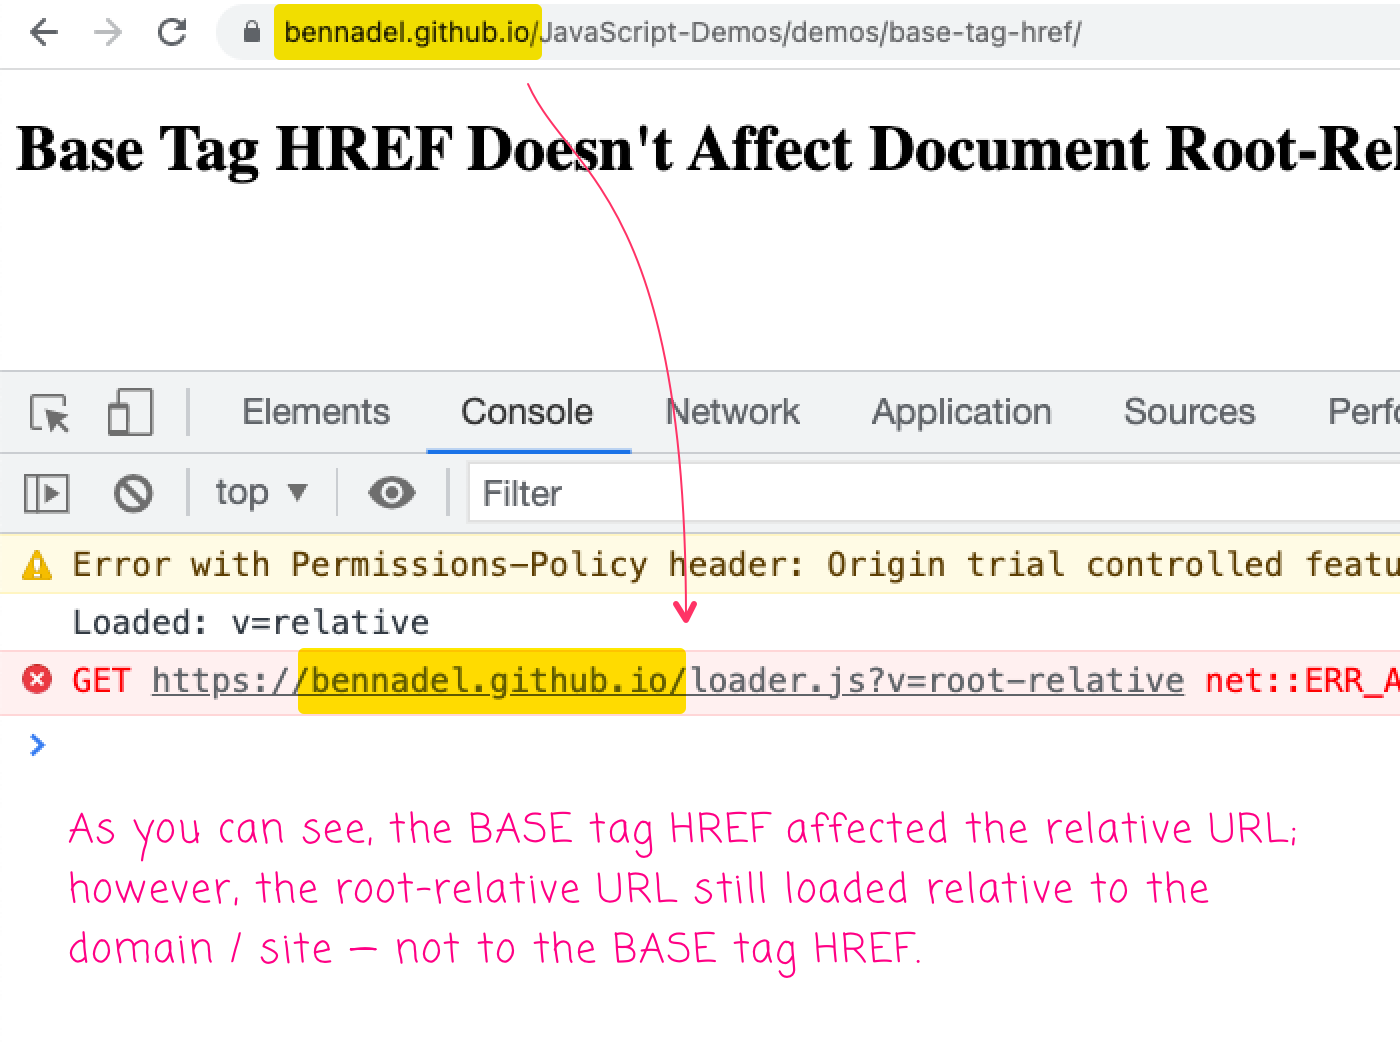 Script with relative URL loads relative to base HREF; however, script with rool-relative URL fails to load, relative to site domain.